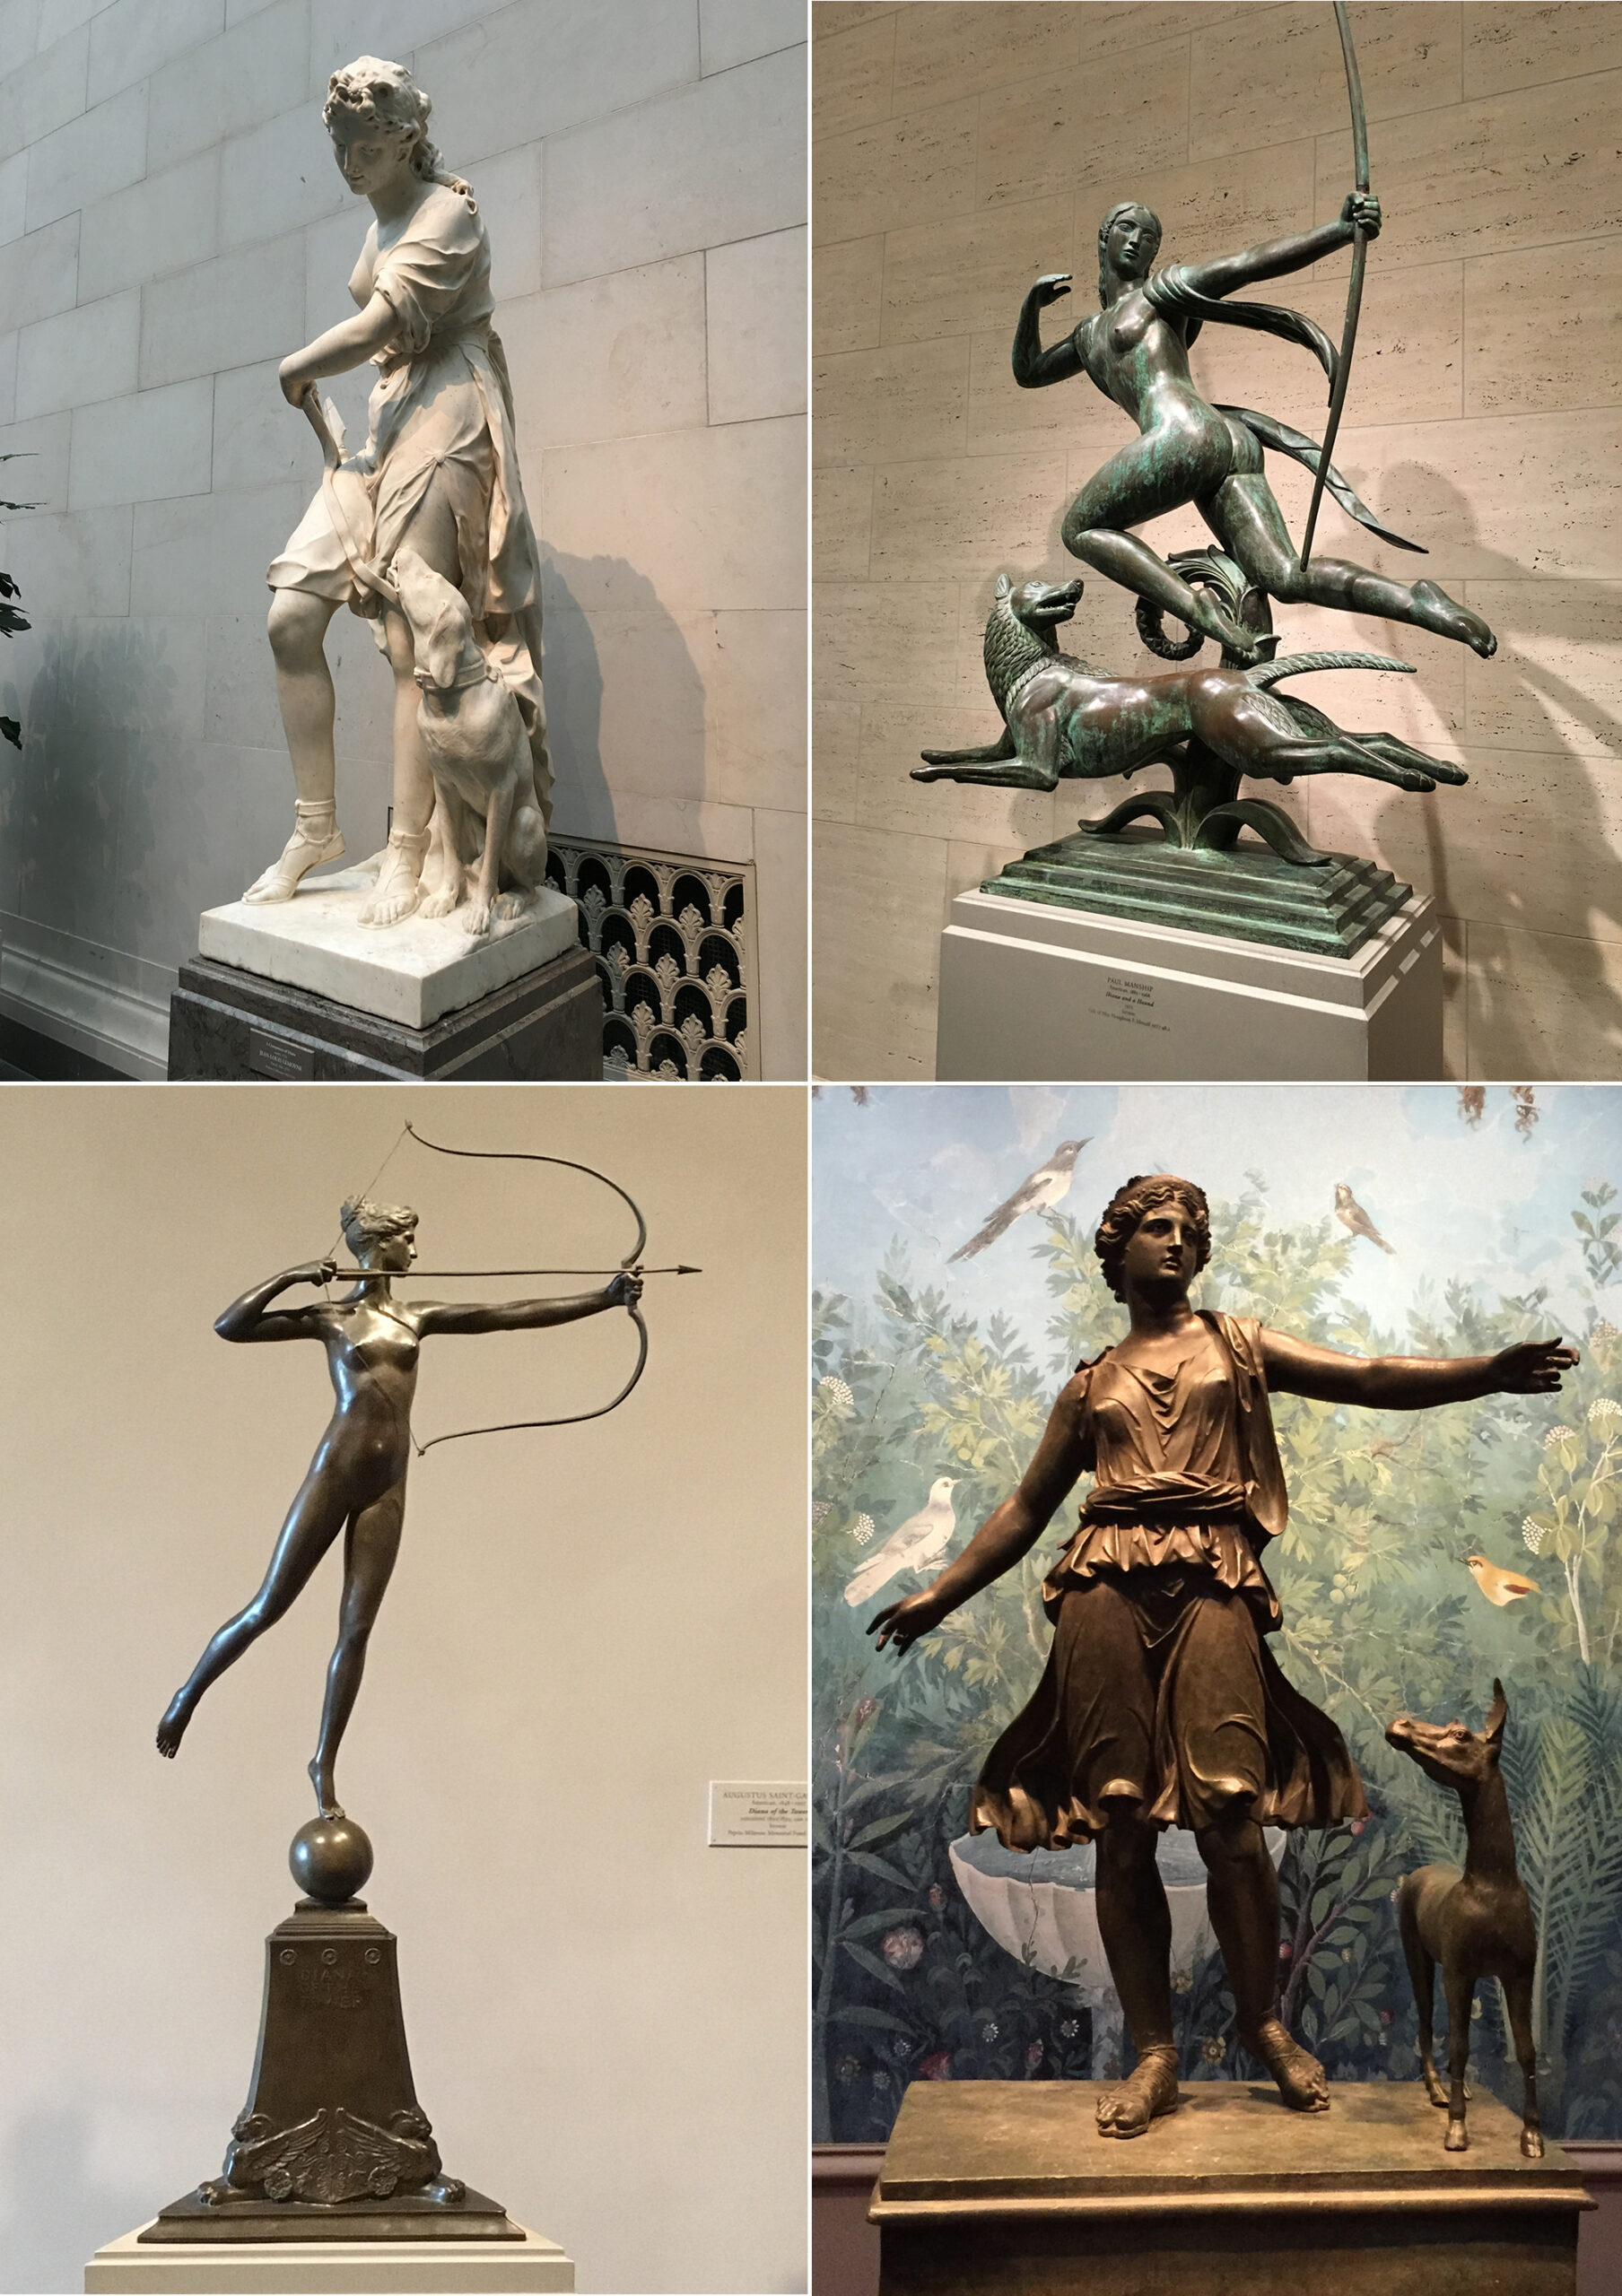 Statues of the goddess Artemis on display at the National Gallery in Washington DC